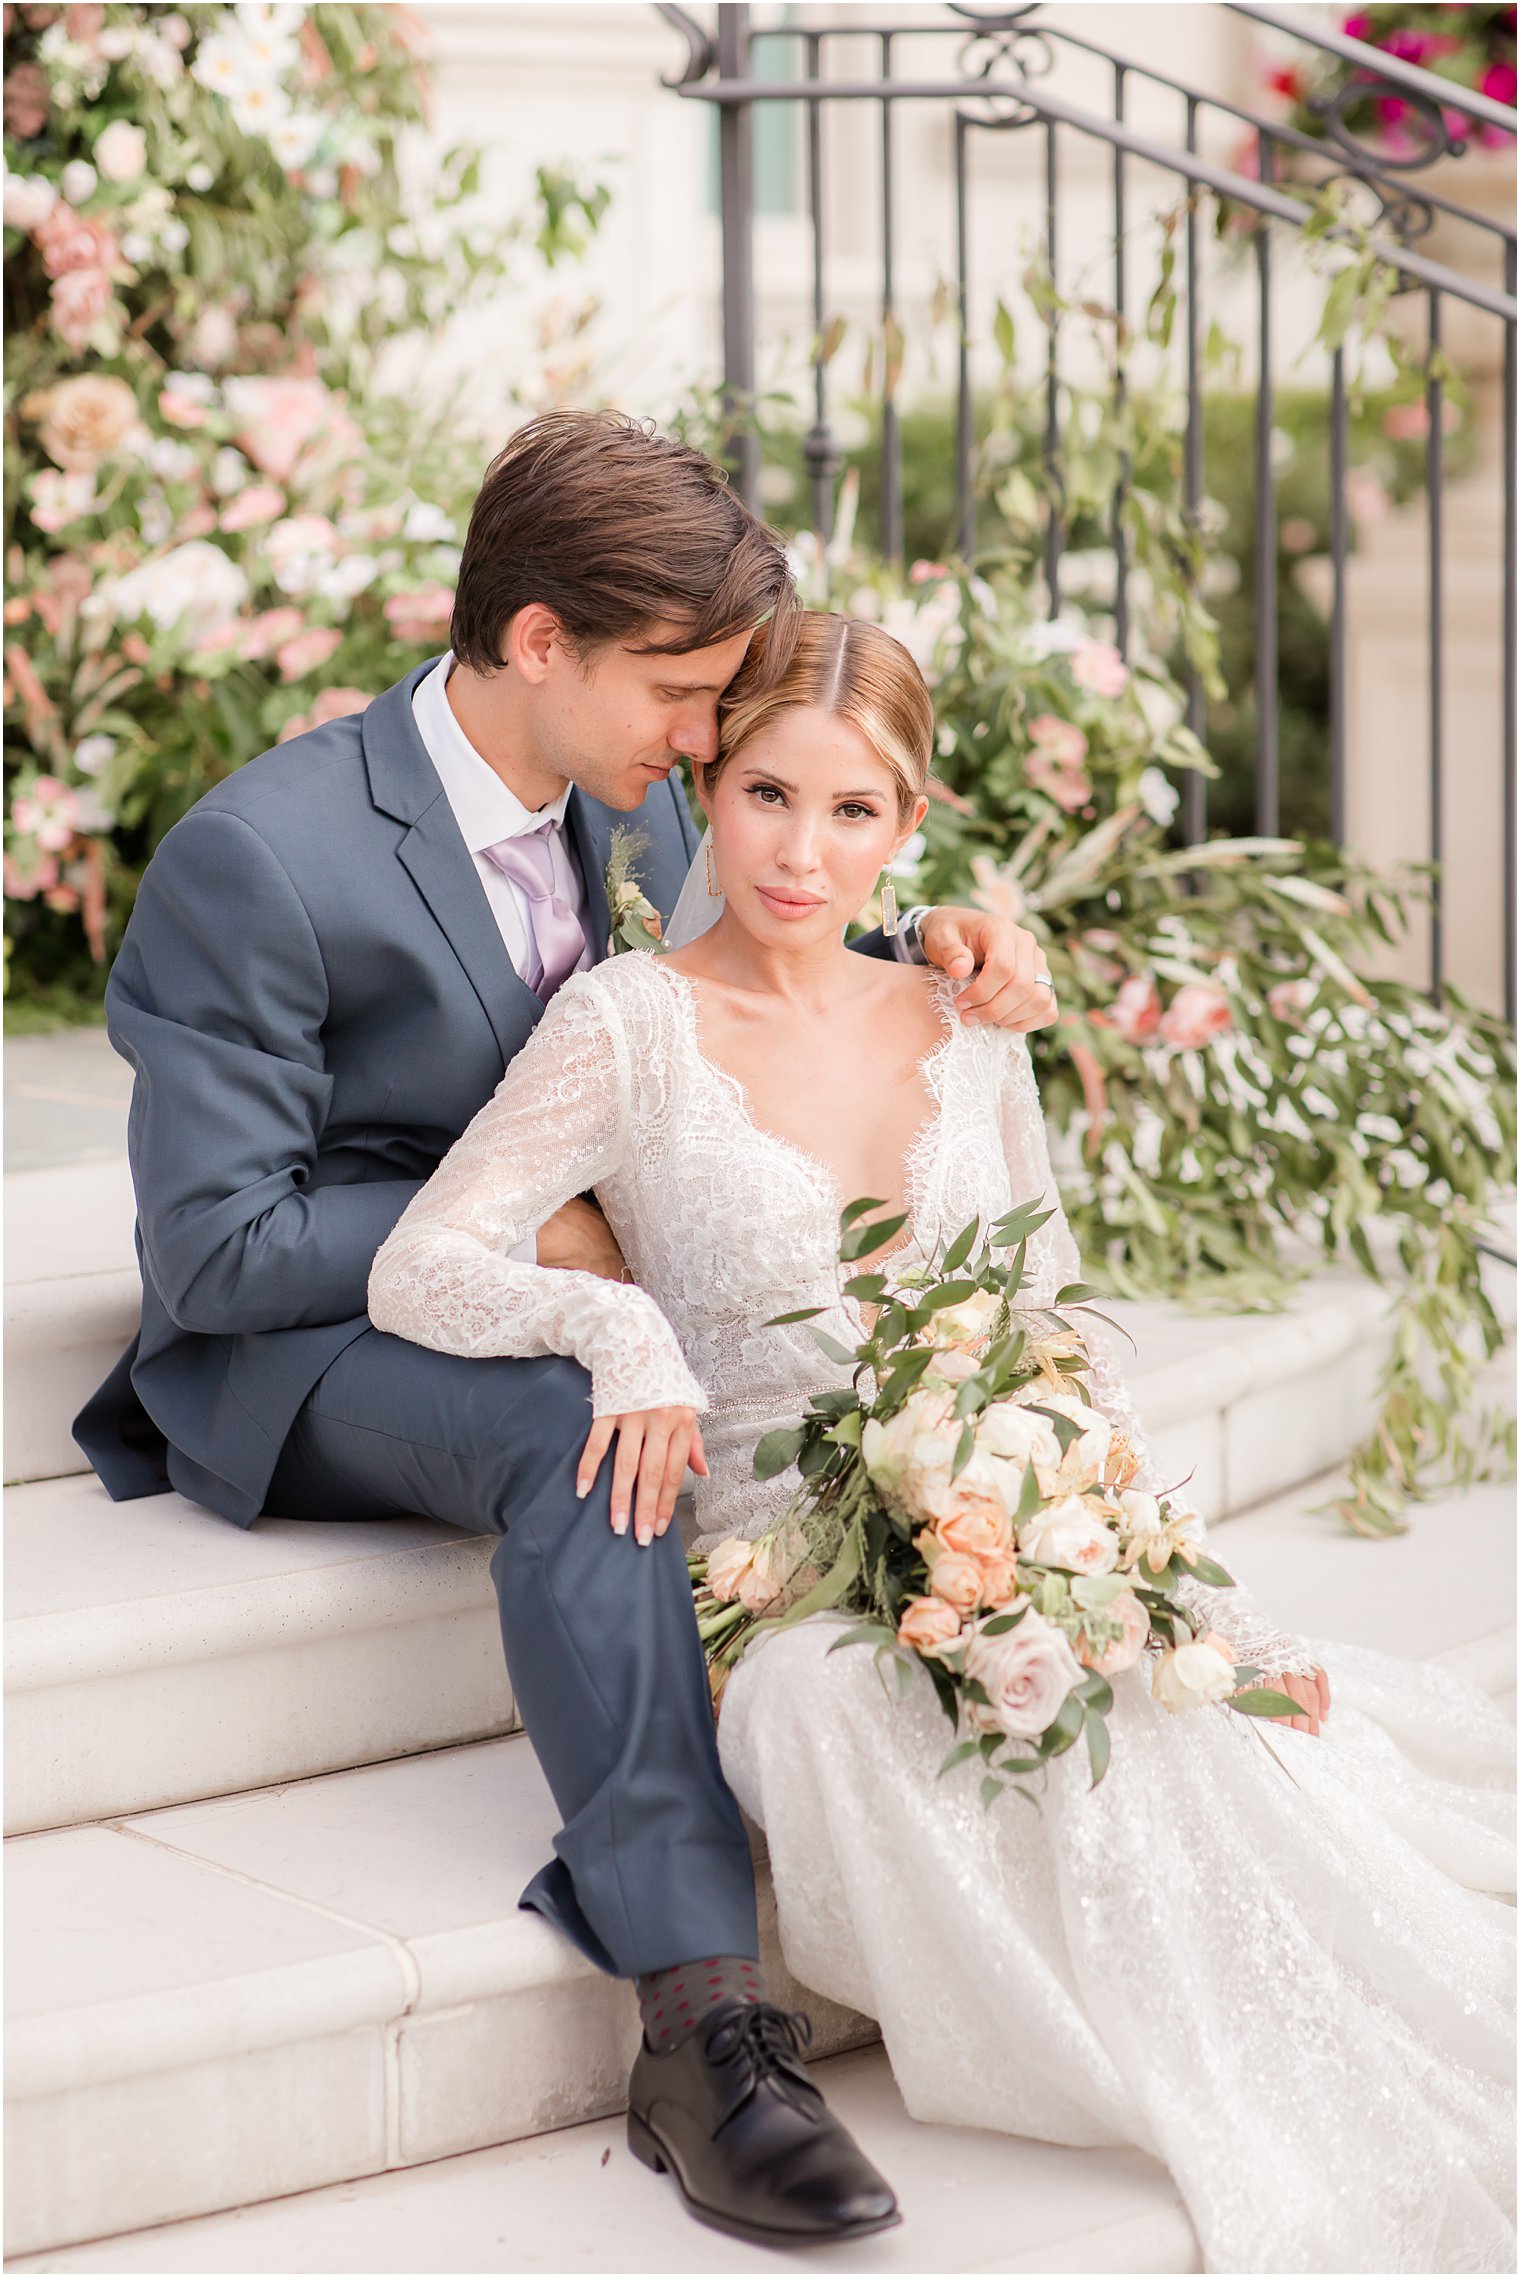 Romantic long-sleeved wedding dress for Park Chateau Estate and Gardens in East Brunswick, NJ